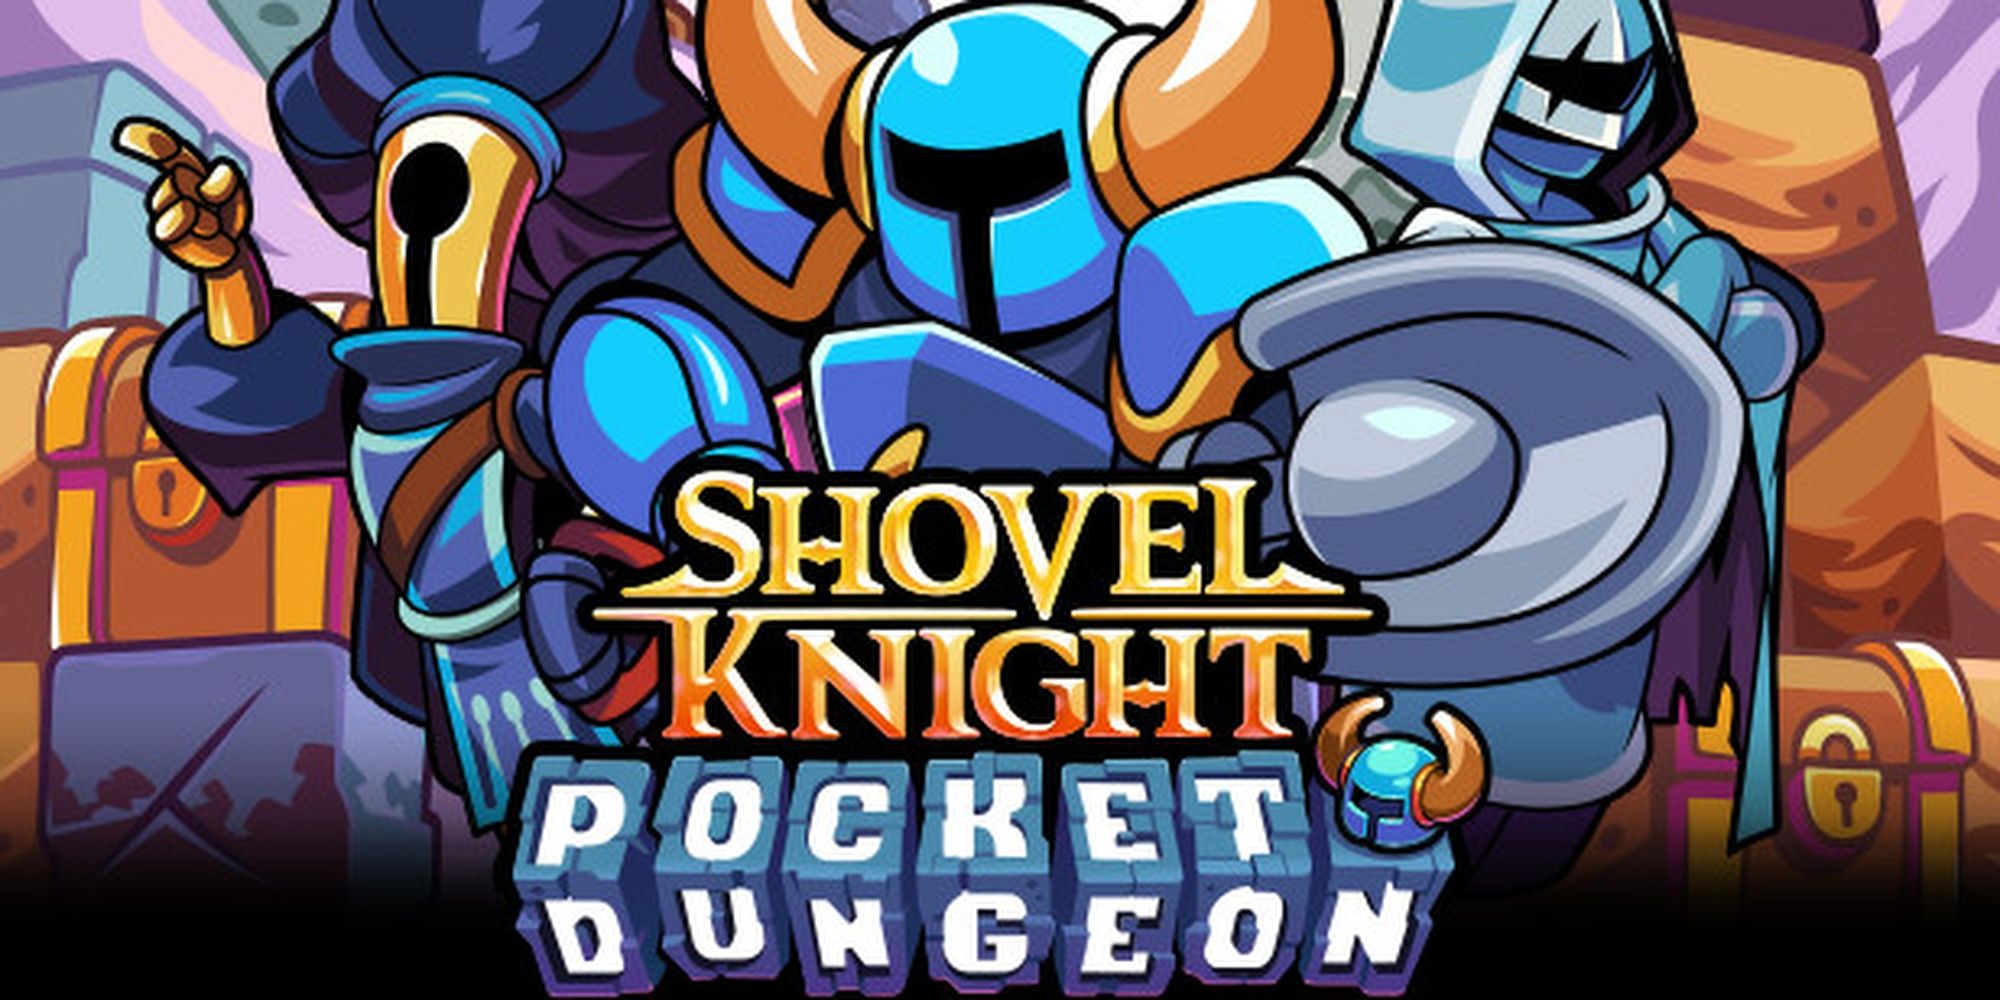 The title screen from Shovel Knight Pocket Dungeon